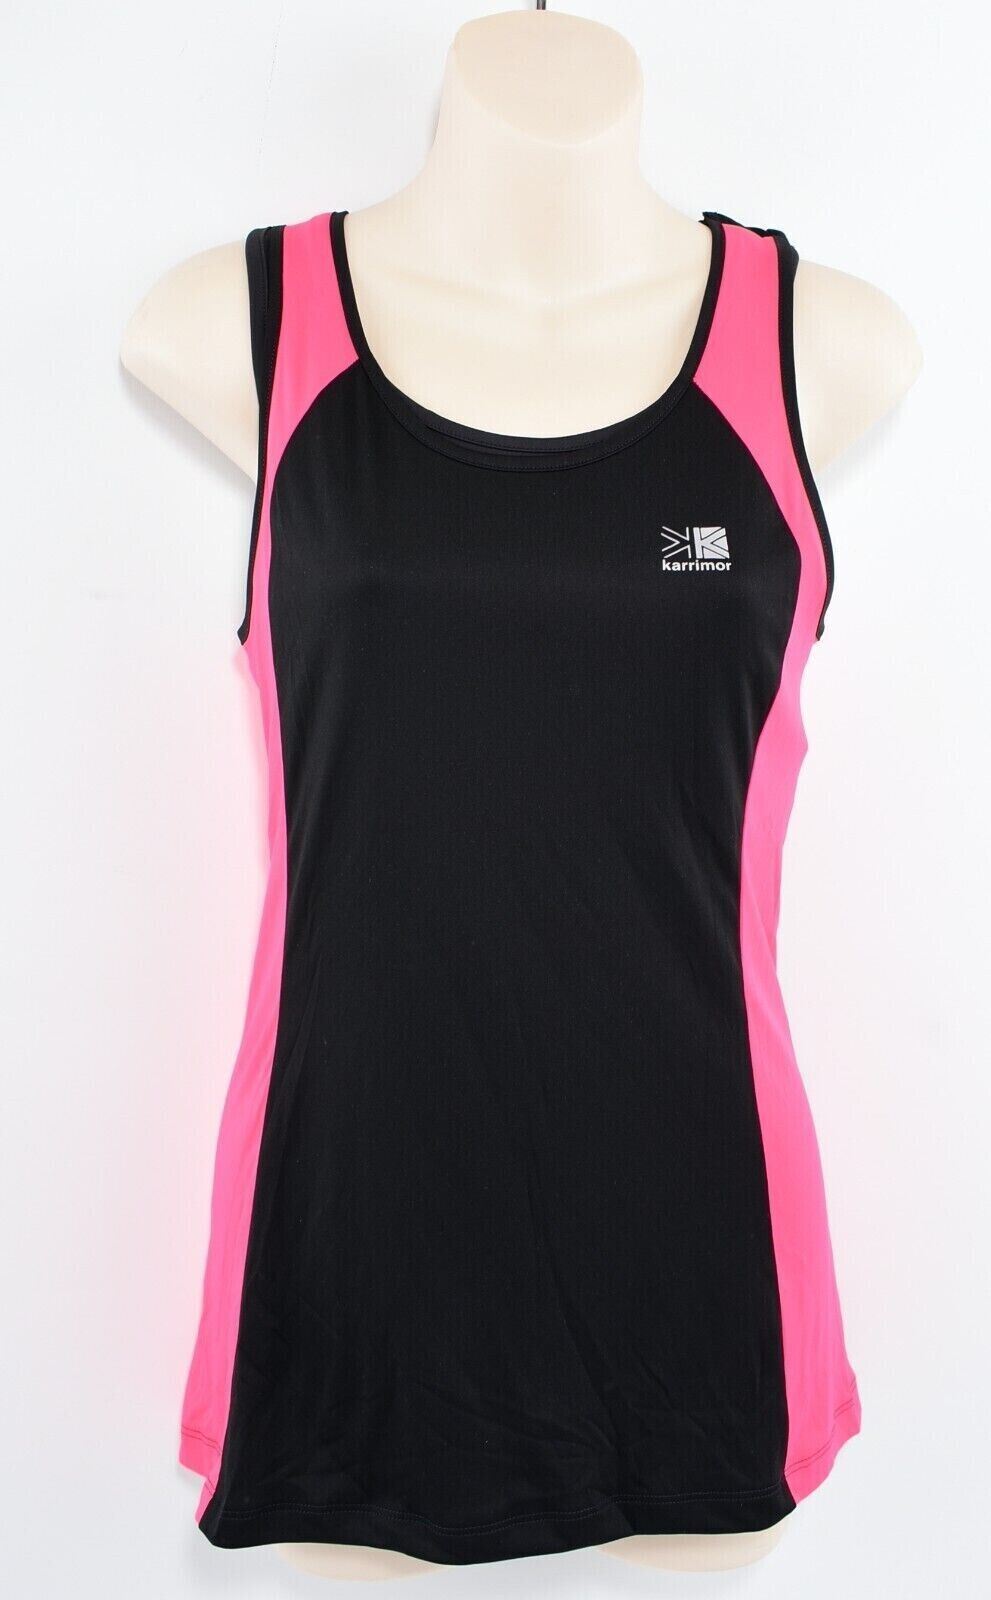 KARRIMOR Women's Running Top, with Integrated Sports Bra, Black/Pink, size L/14